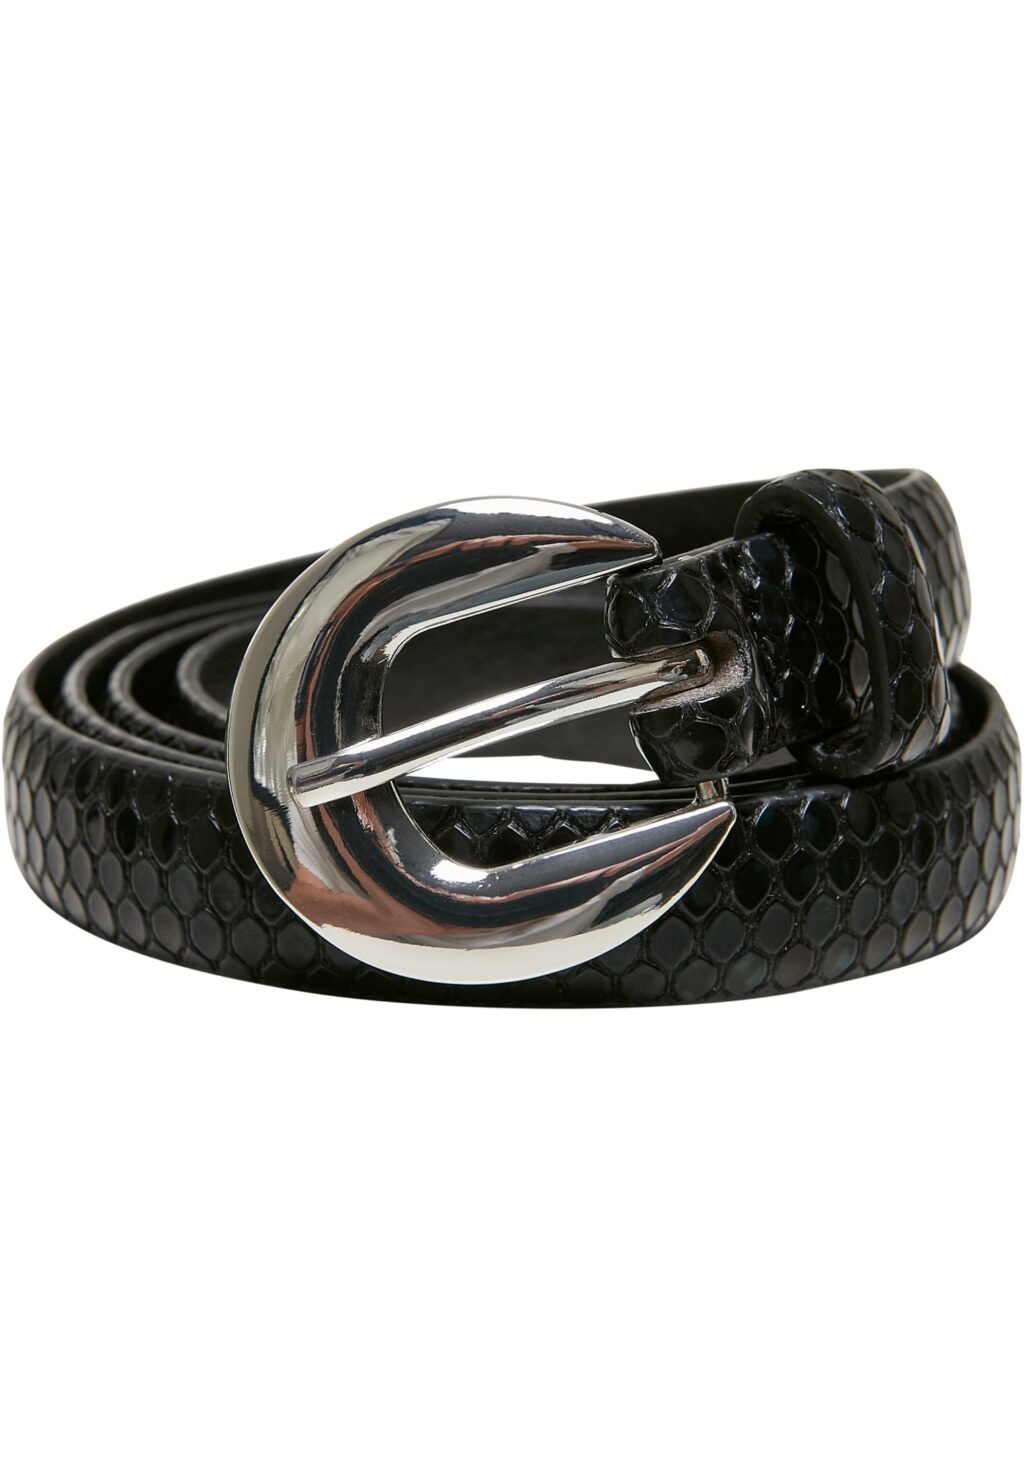 Snake Synthetic Leather Ladies Belt black TB5666